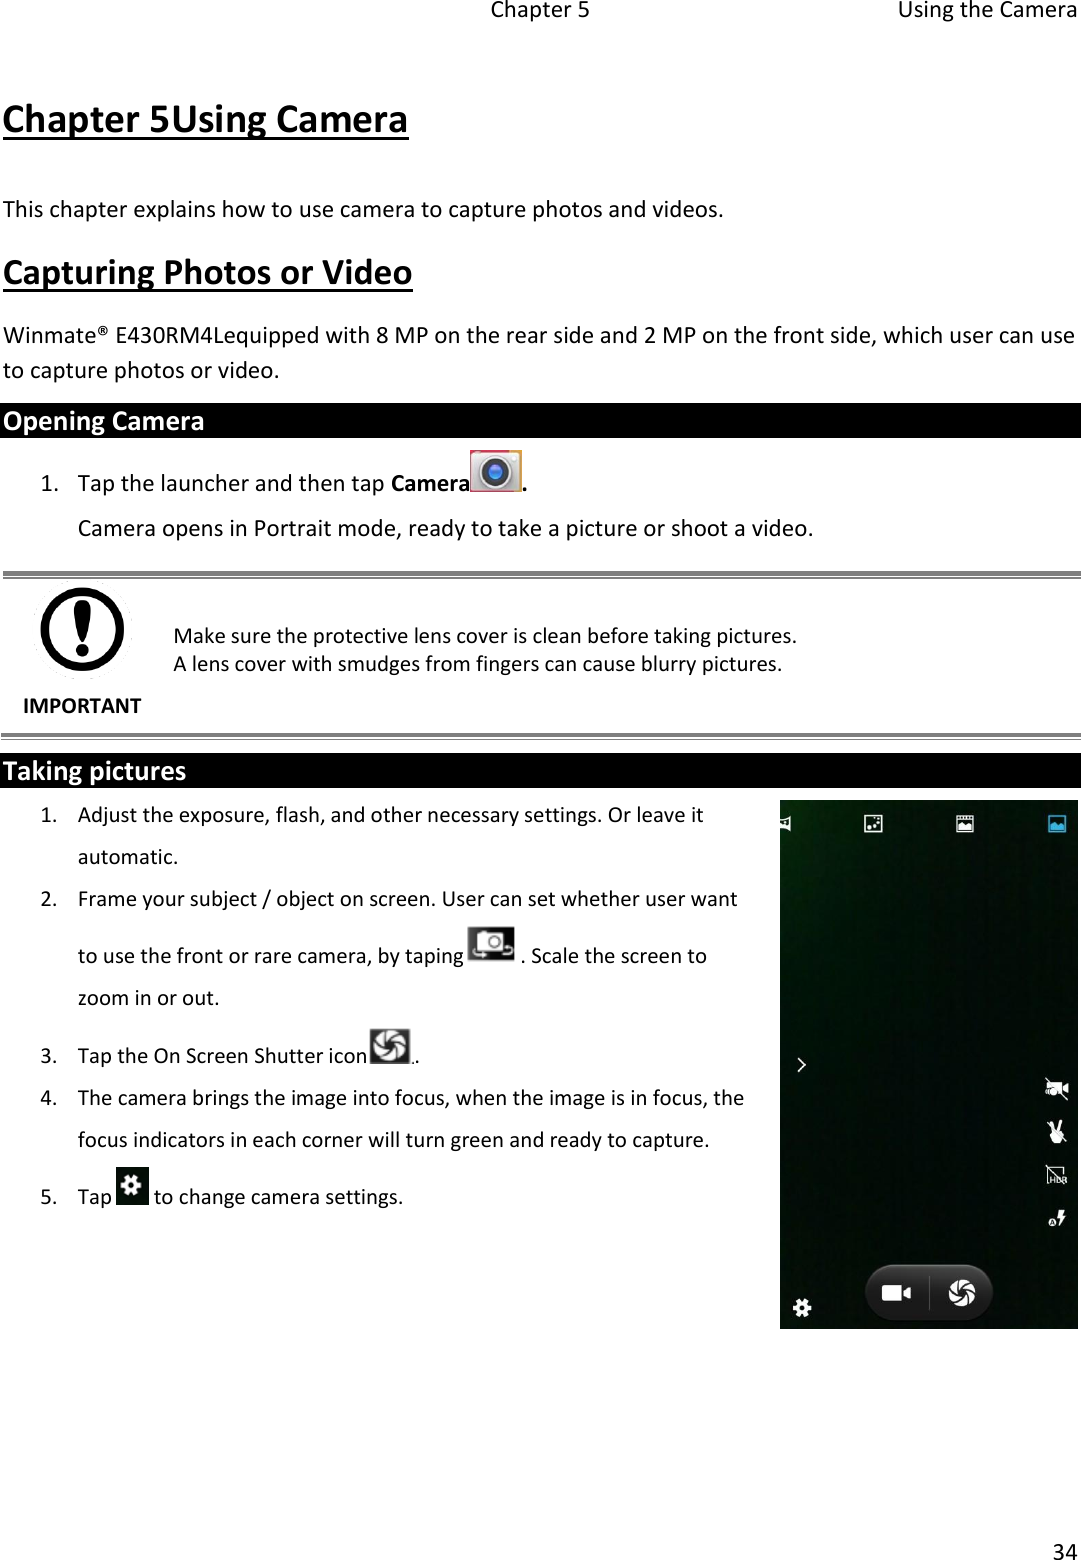   Chapter 5  Using the Camera  34  Chapter 5Using Camera This chapter explains how to use camera to capture photos and videos. Capturing Photos or Video Winmate® E430RM4Lequipped with 8 MP on the rear side and 2 MP on the front side, which user can use to capture photos or video. Opening Camera 1. Tap the launcher and then tap Camera . Camera opens in Portrait mode, ready to take a picture or shoot a video.  IMPORTANT Make sure the protective lens cover is clean before taking pictures.  A lens cover with smudges from fingers can cause blurry pictures. Taking pictures 1. Adjust the exposure, flash, and other necessary settings. Or leave it automatic. 2. Frame your subject / object on screen. User can set whether user want to use the front or rare camera, by taping . Scale the screen to zoom in or out. 3. Tap the On Screen Shutter icon . 4. The camera brings the image into focus, when the image is in focus, the focus indicators in each corner will turn green and ready to capture. 5. Tap   to change camera settings.       